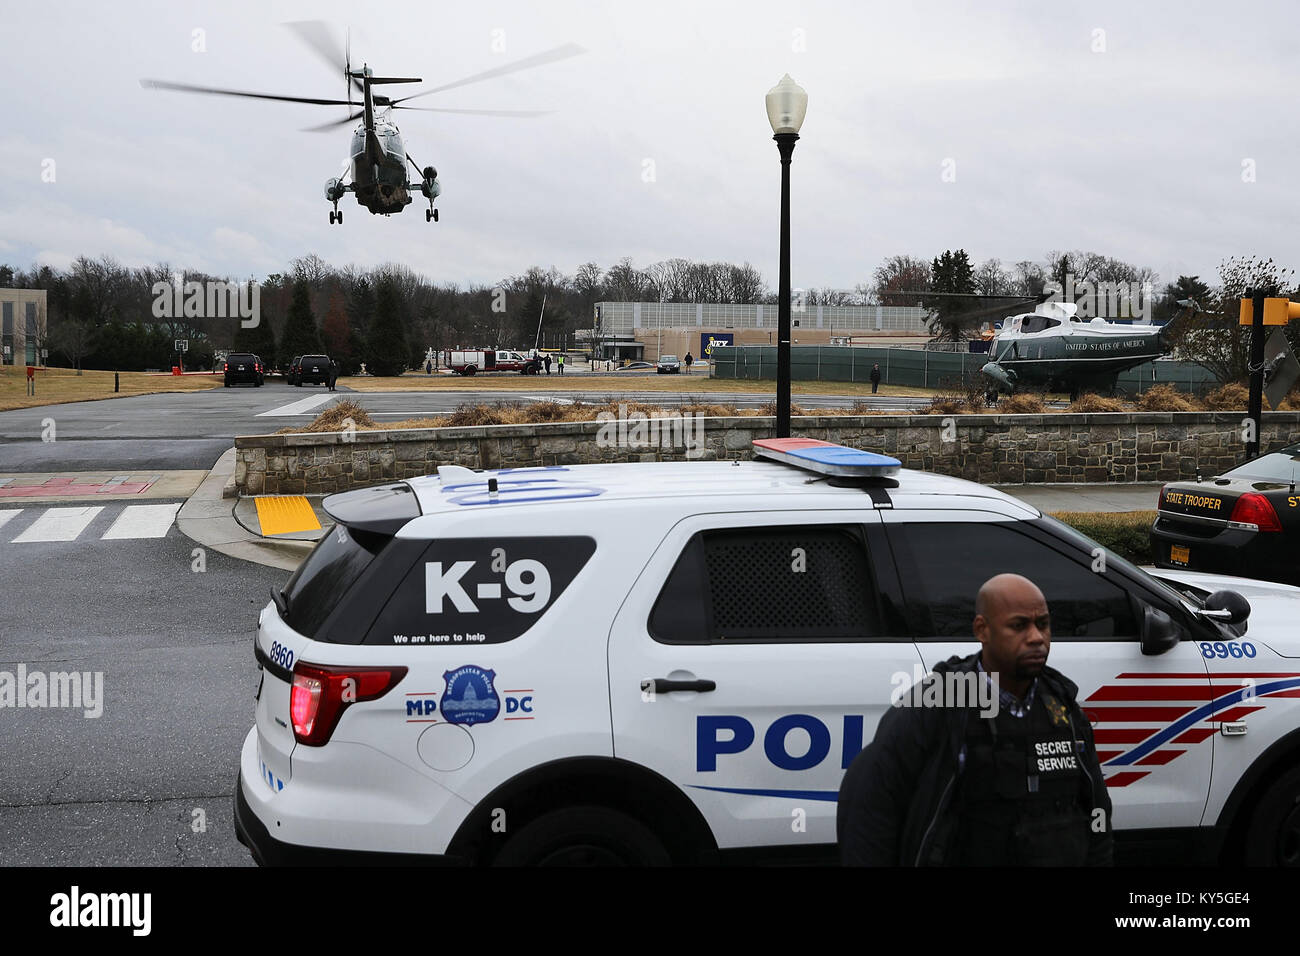 With United States President Donald J. Trump on board, Marine One lifts off from Walter Reed National Military Medical Center following the president's annual physical examination January 12, 2018 in Bethesda, Maryland. Trump will next travel to Florida to spend the Dr. Martin Luther King Jr. Day holiday weekend at his Mar-a-Lago resort. Credit: Chip Somodevilla/Pool via CNP /MediaPunch Stock Photo